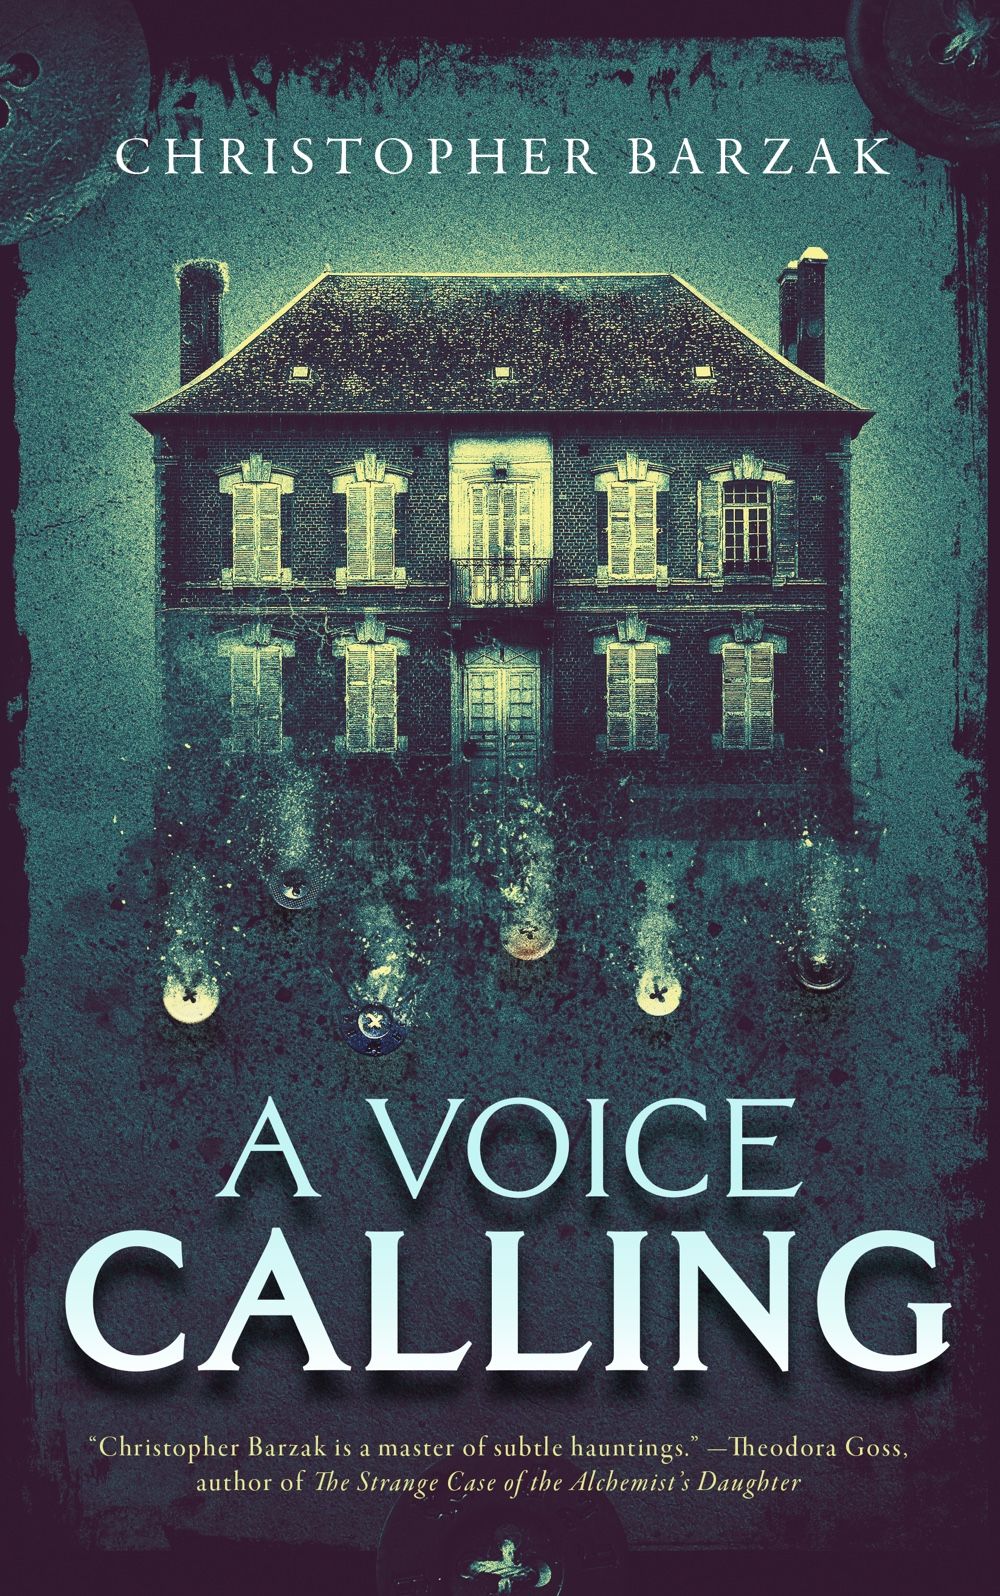 Cover image of A Voice Calling, a horror novella by Christopher Barzak